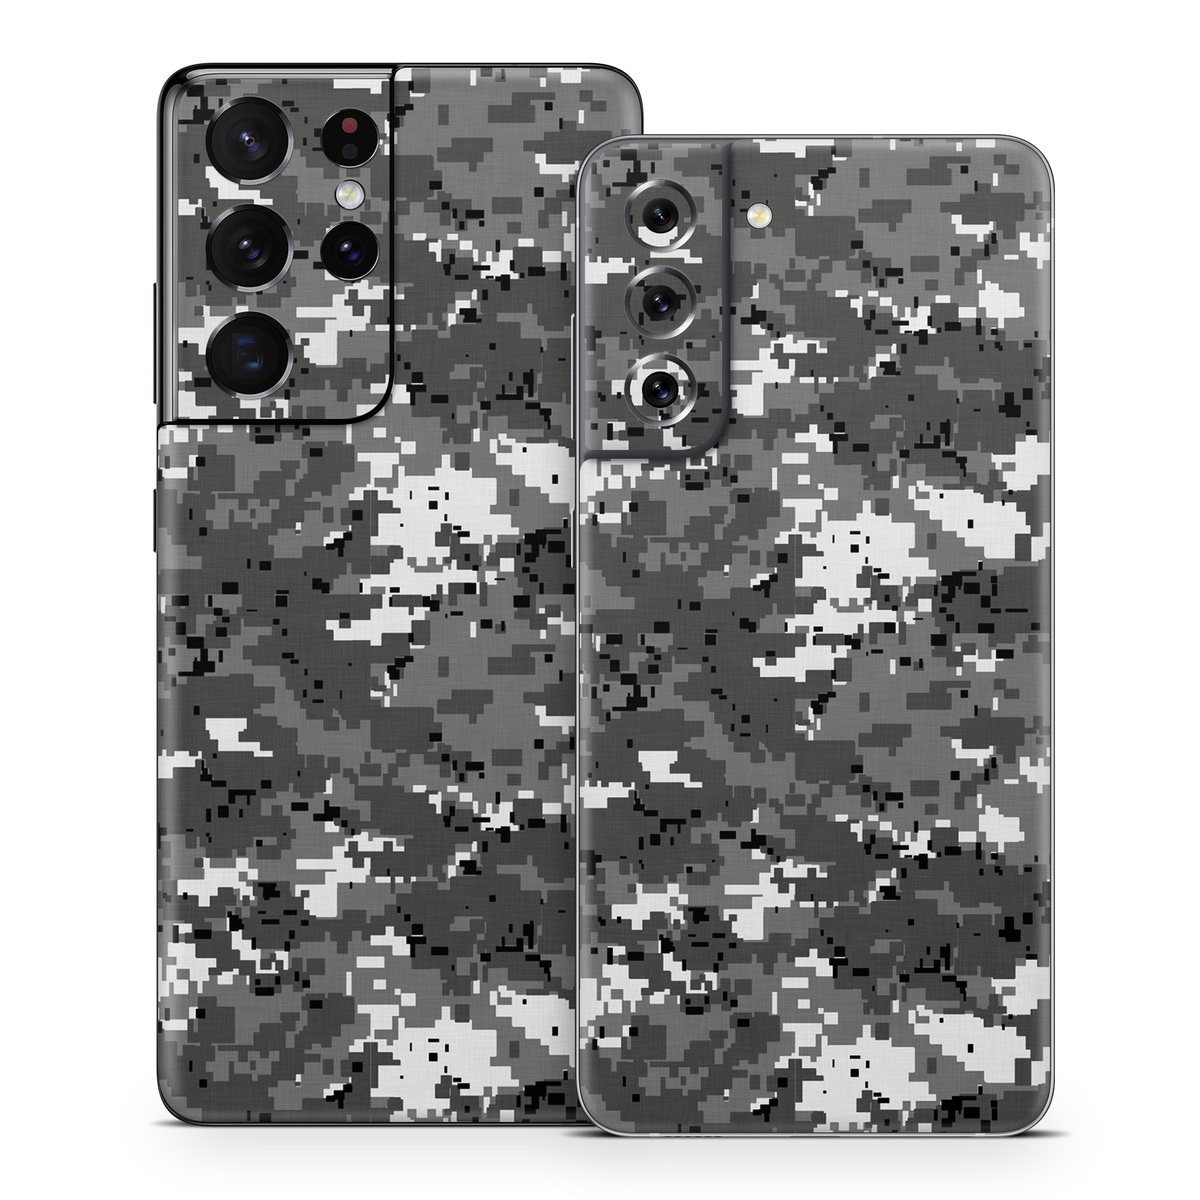 Samsung Galaxy S21 Skin design of Military camouflage, Pattern, Camouflage, Design, Uniform, Metal, Black-and-white with black, gray colors